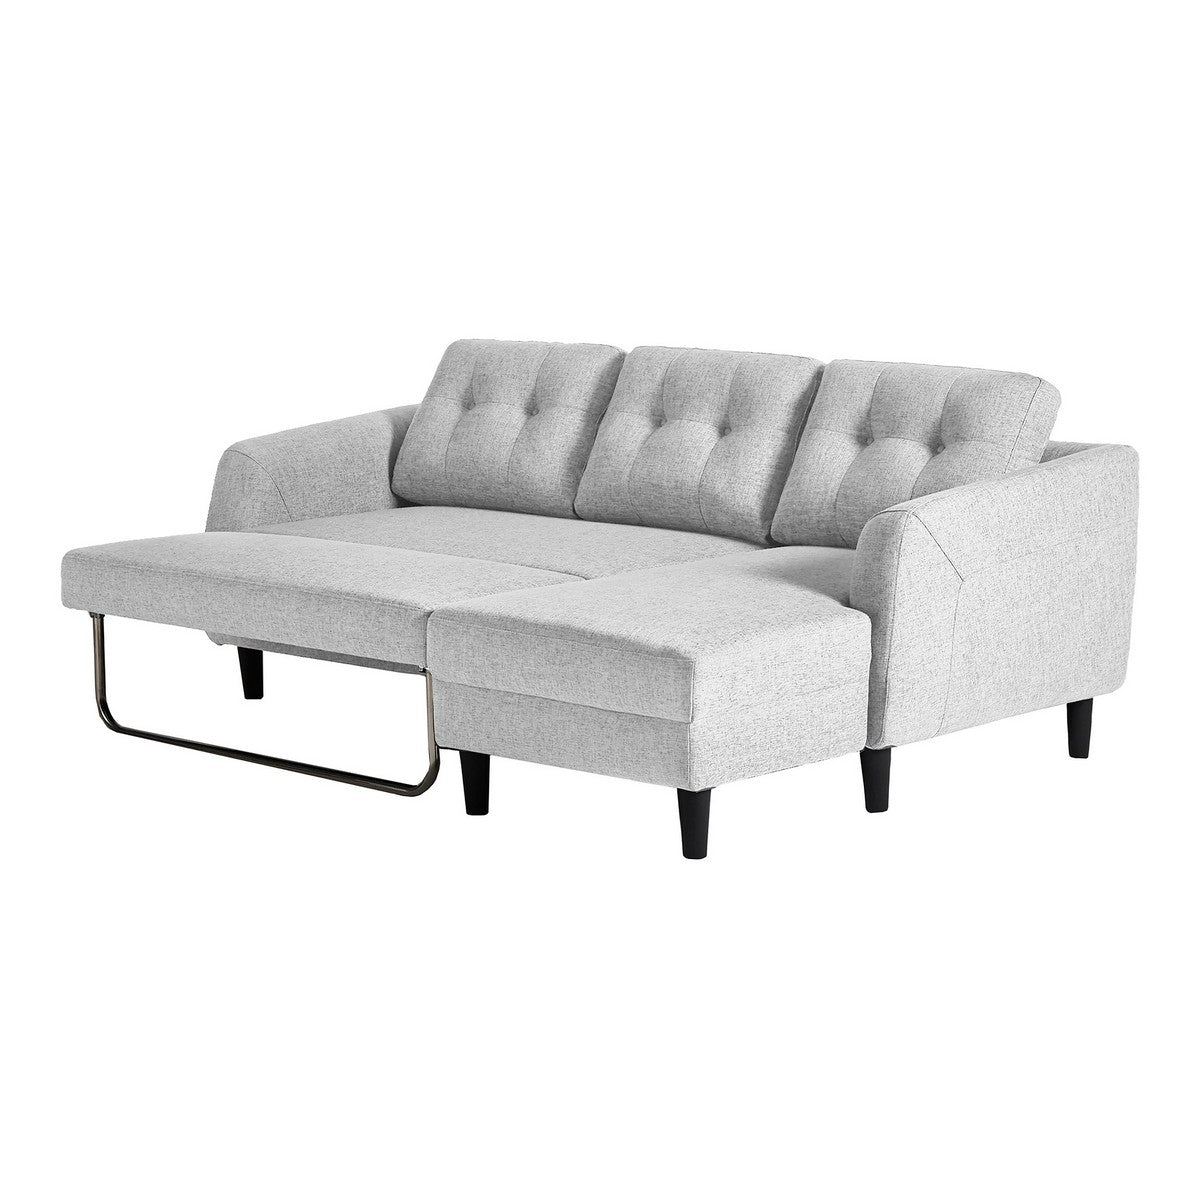 Moe's Home Collection Belagio Sofa Bed With Chaise Light Grey Right - MT-1019-29-R